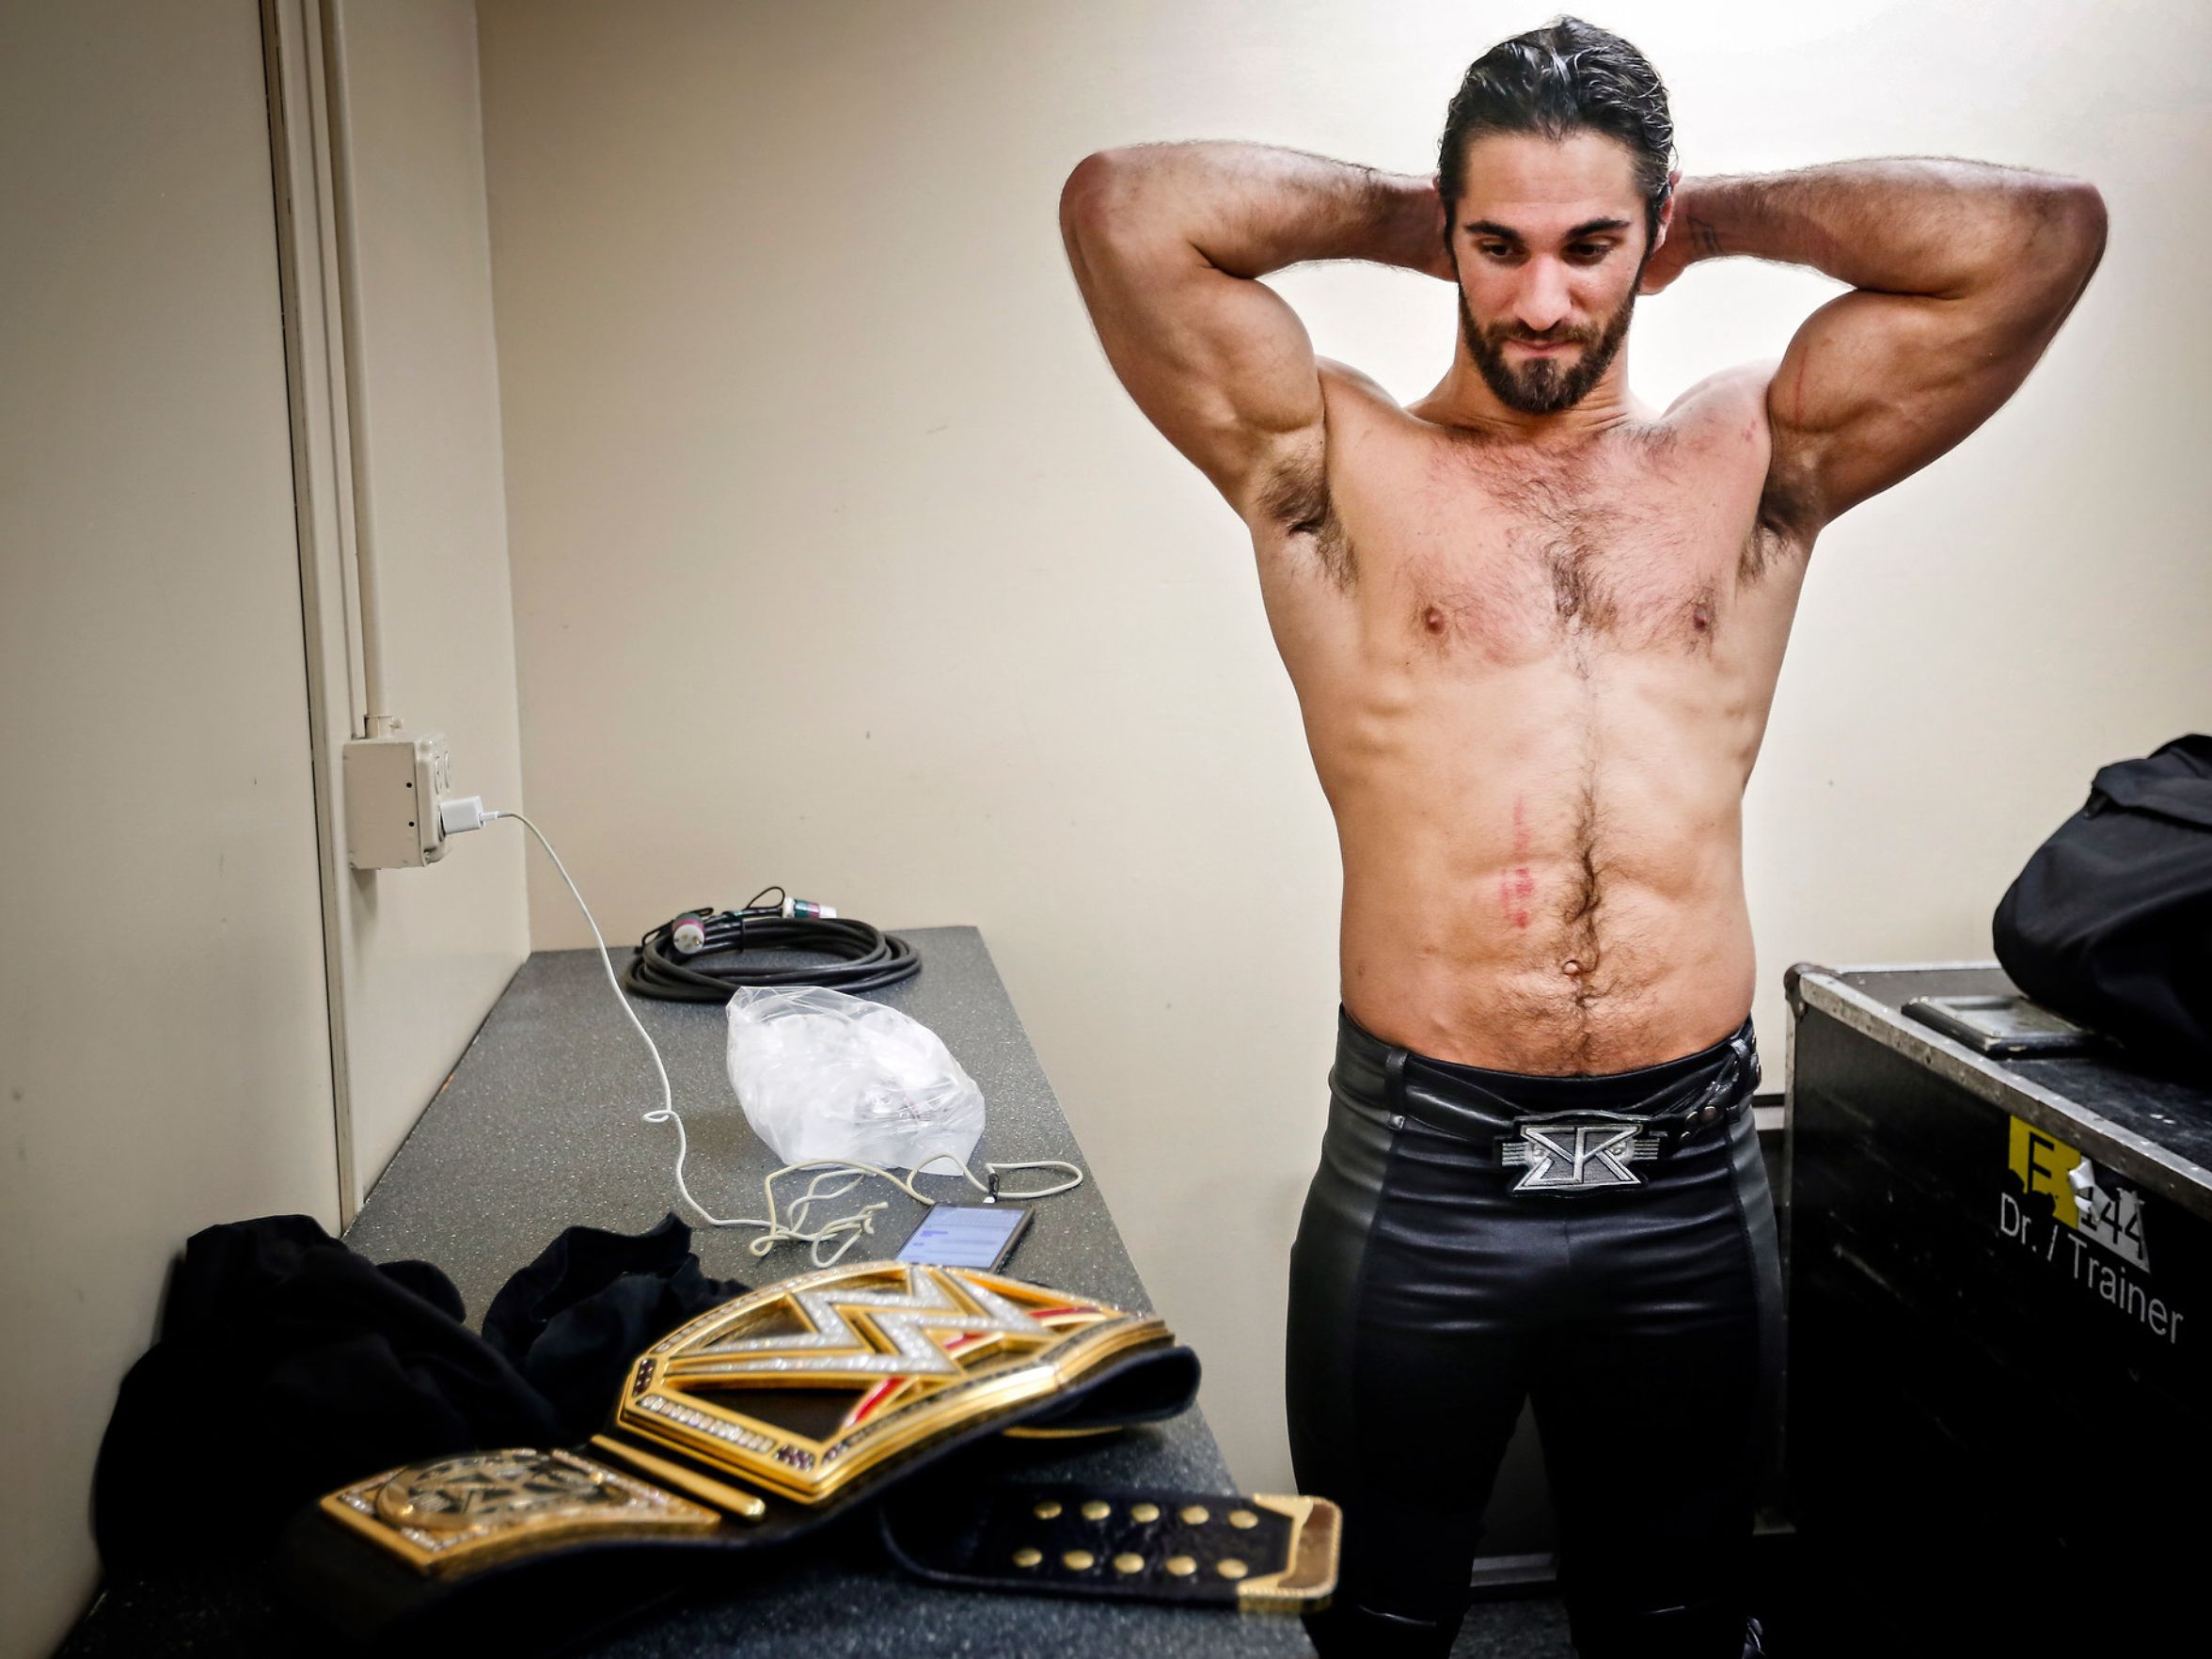 Rollins article